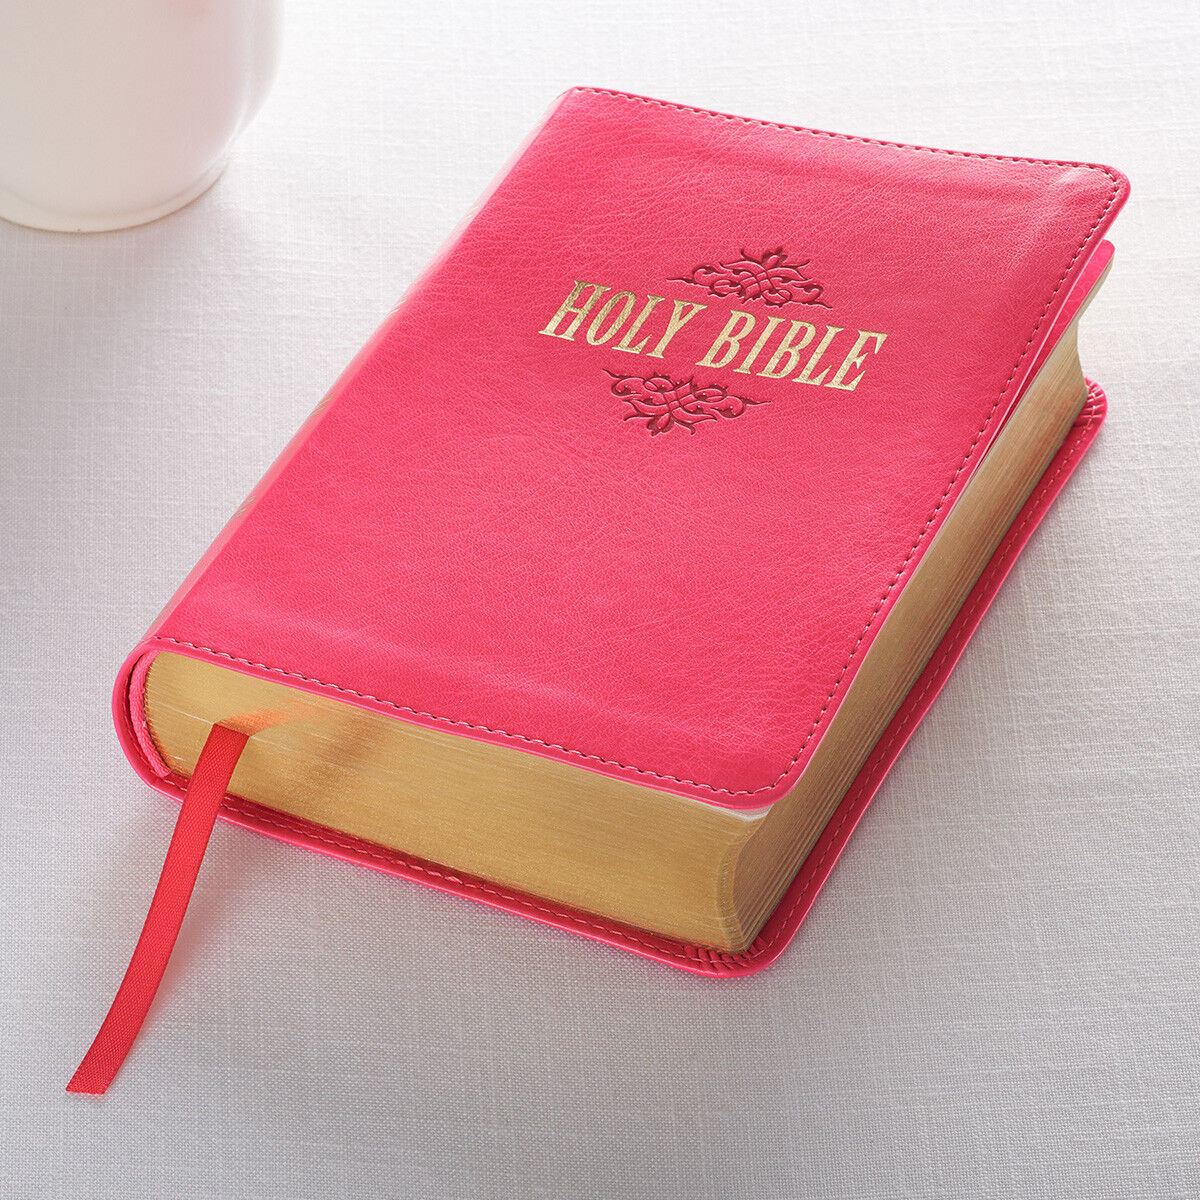 KJV Holy Bible King James Version Pink Large Print Small Size Compact Edition  Без бренда